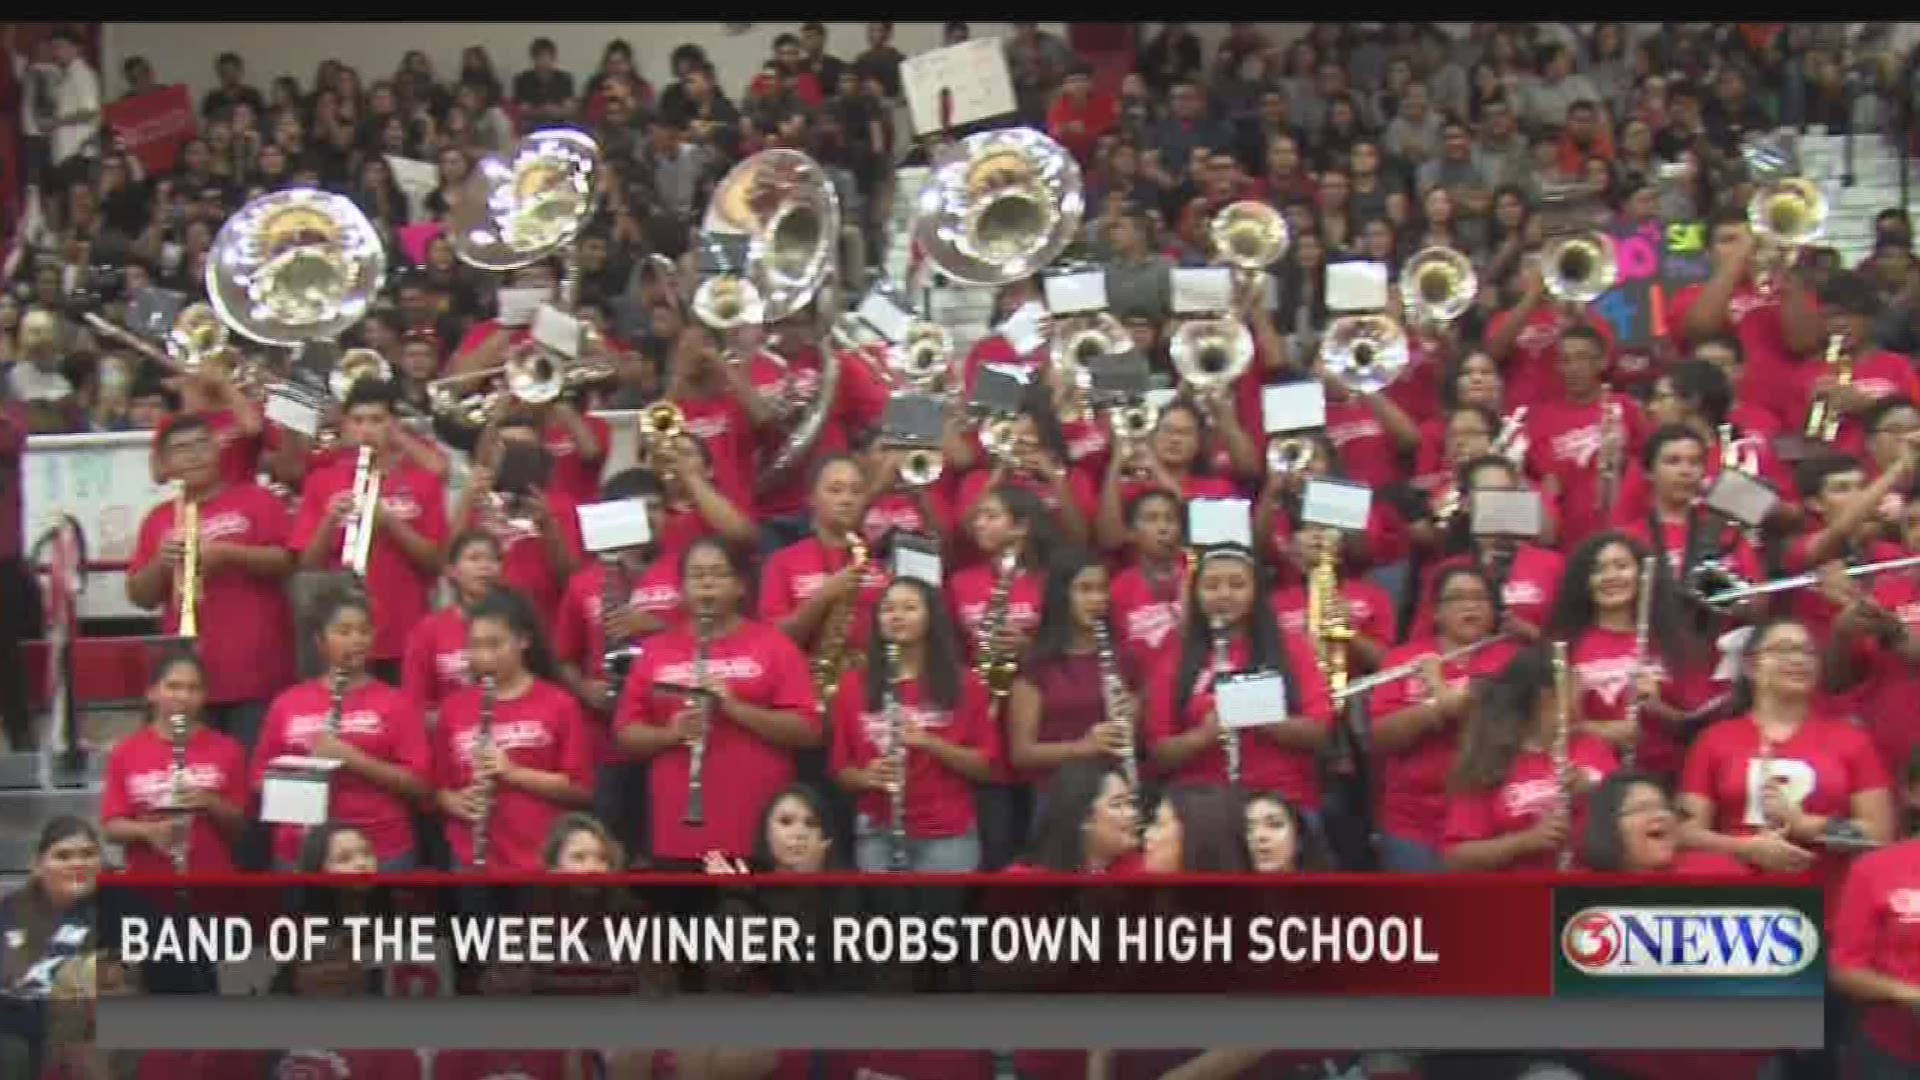 Week 2 of this year's Blitz Band of the Week was a match up between Kingsville and Robstown high schools.